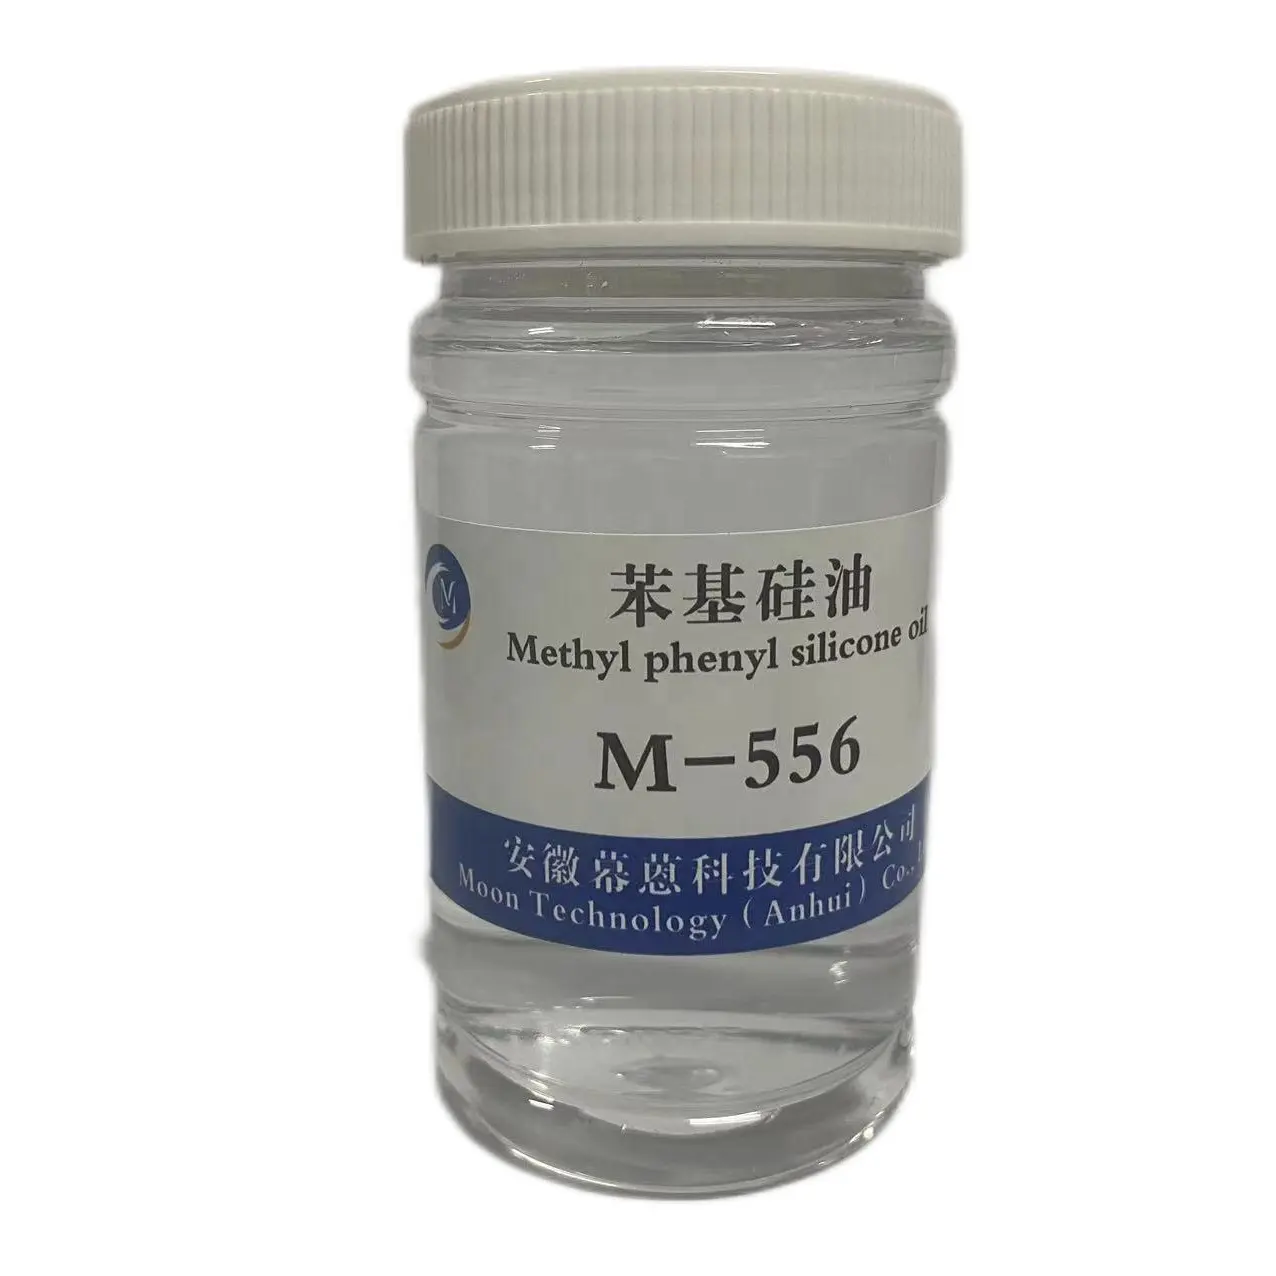 Daily Chemicals 556 Phenyl Methly Silicone Oil CAS 63148-58-3 Silicone oil Raw material in stock